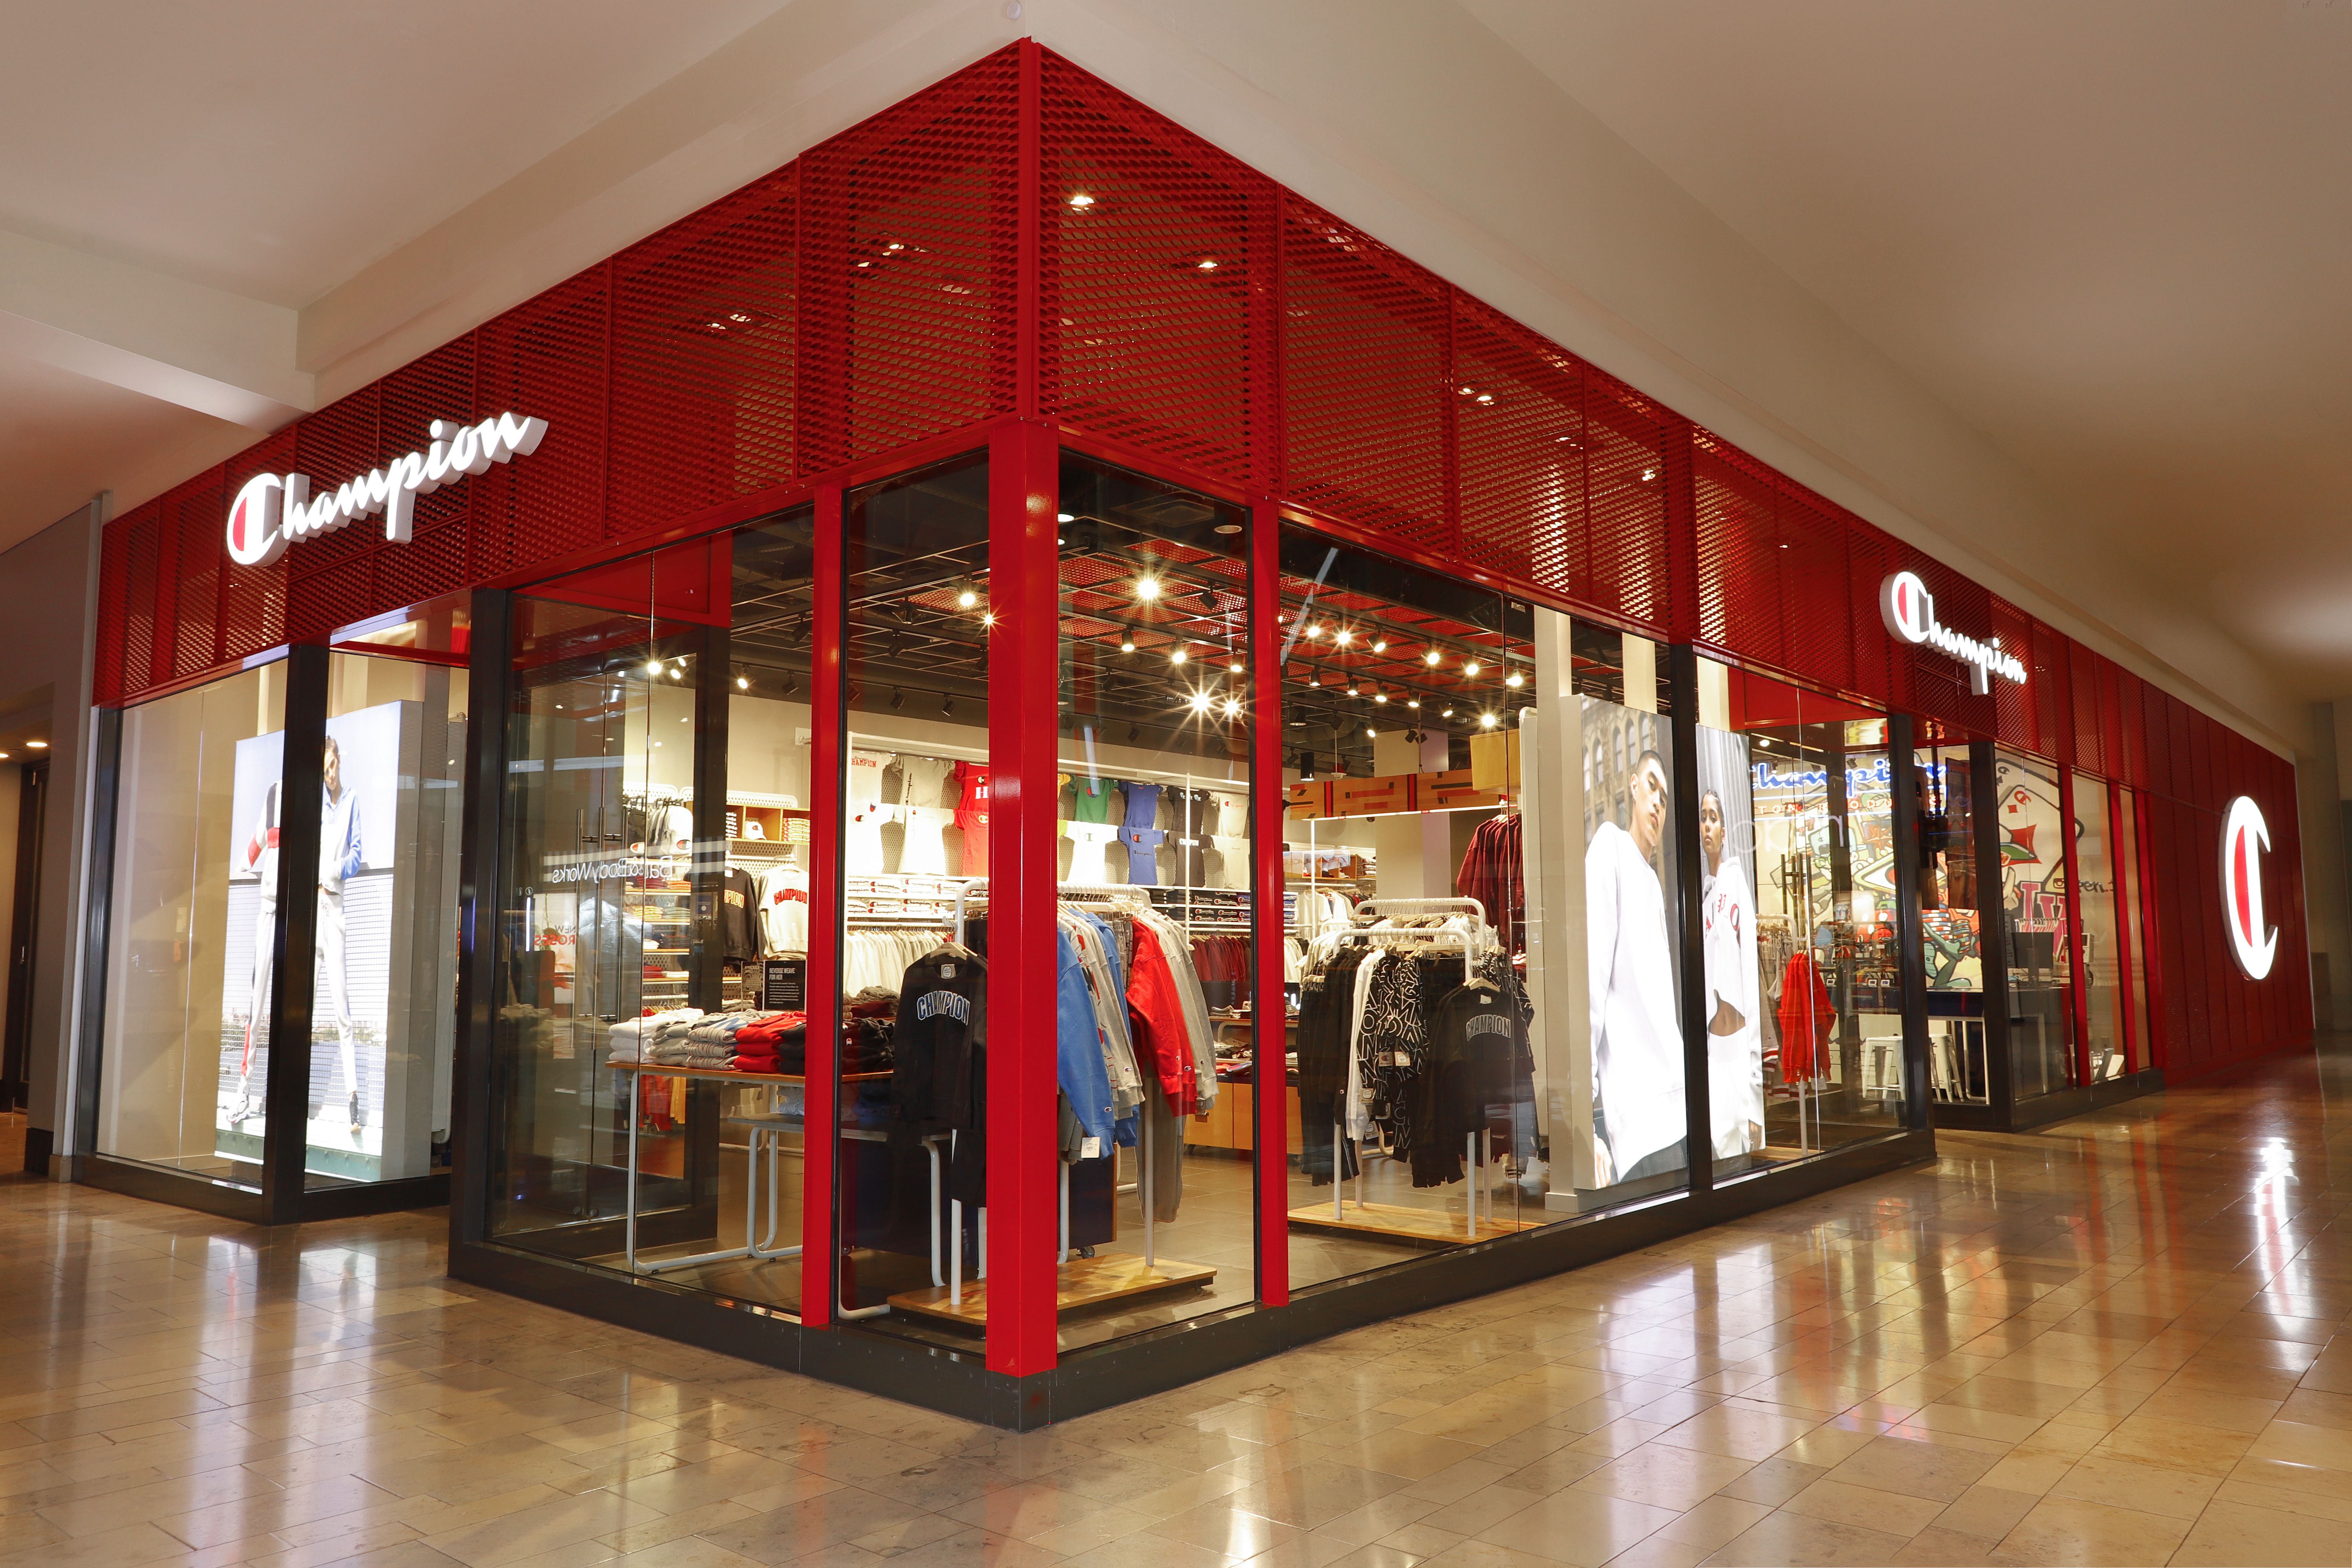 Champion® Athleticwear Hits the Jackpot With New Store in Las Vegas the Center of the Strip | Business Wire